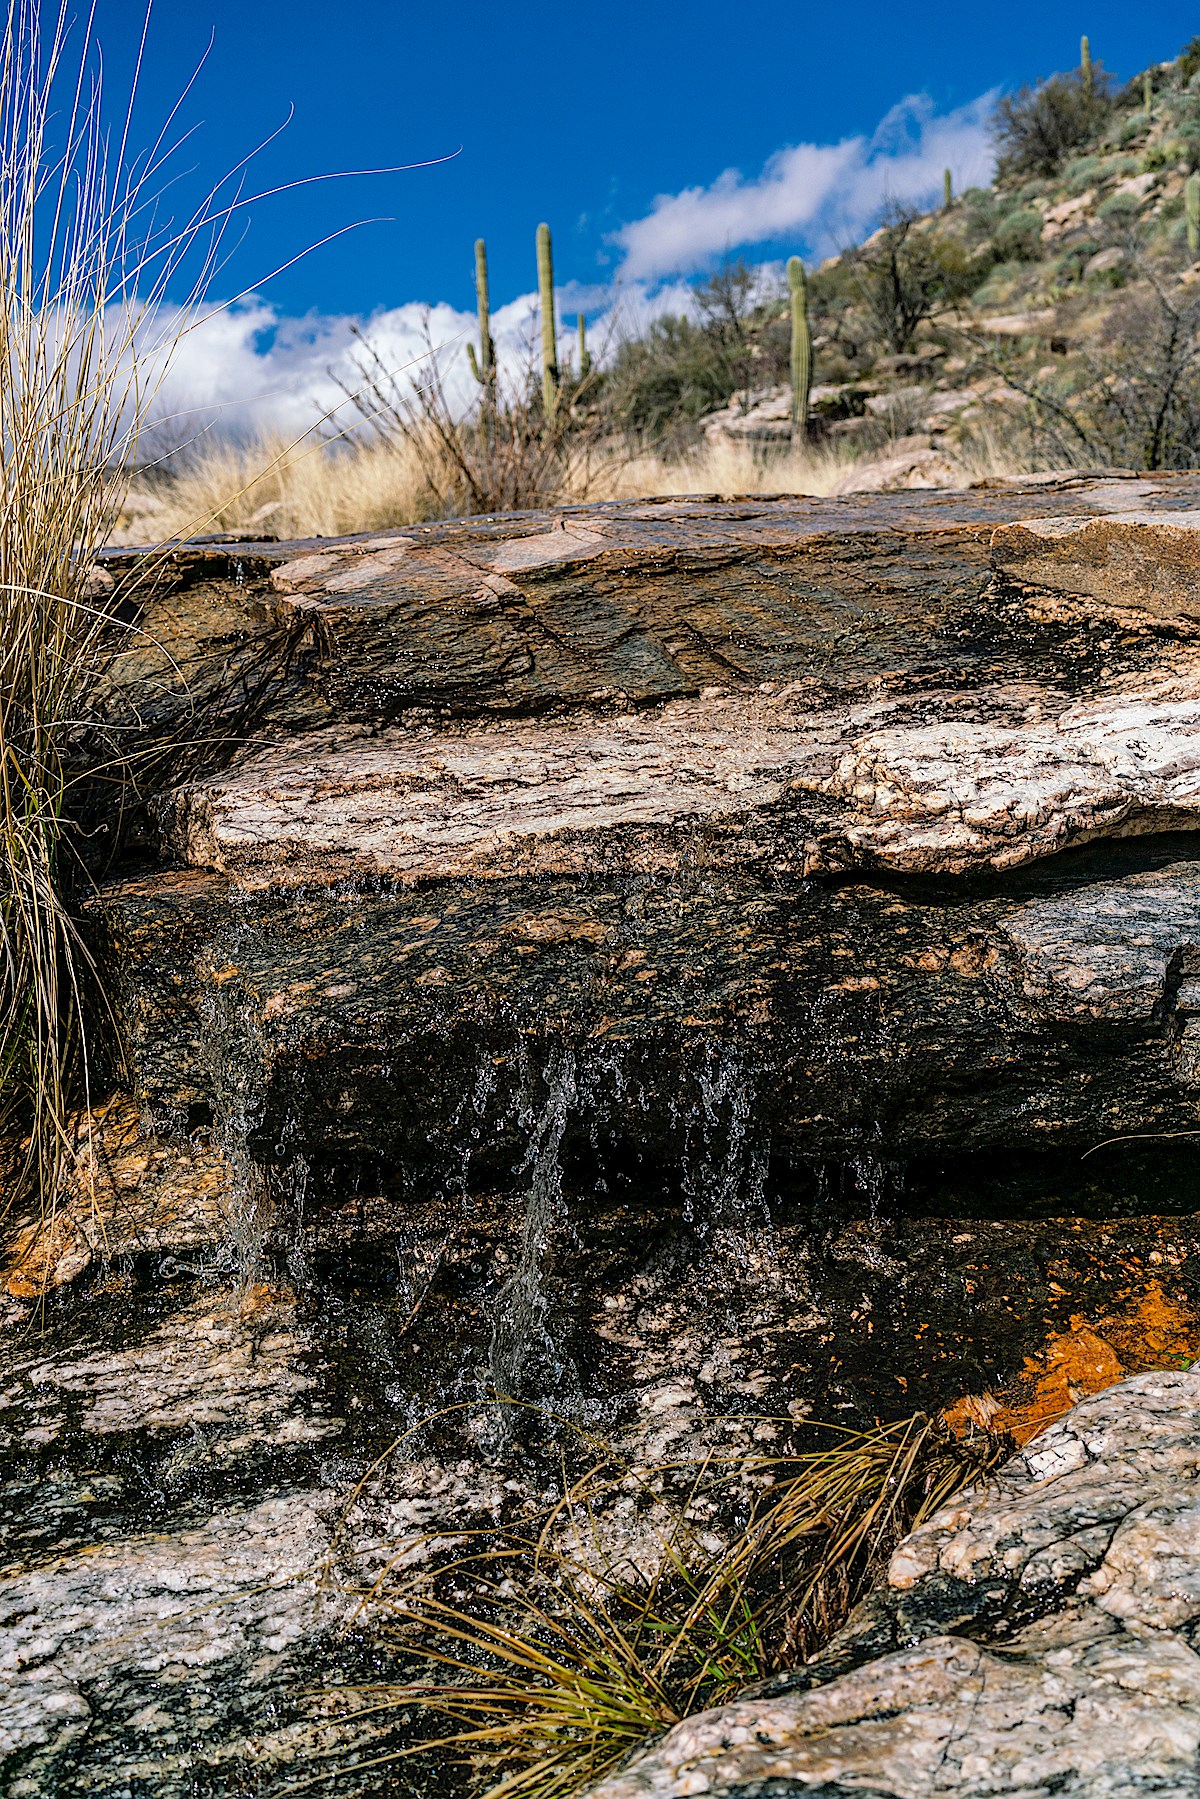 Water at a rocky canyon crossing lower on the Soldier Trail. February 2019.